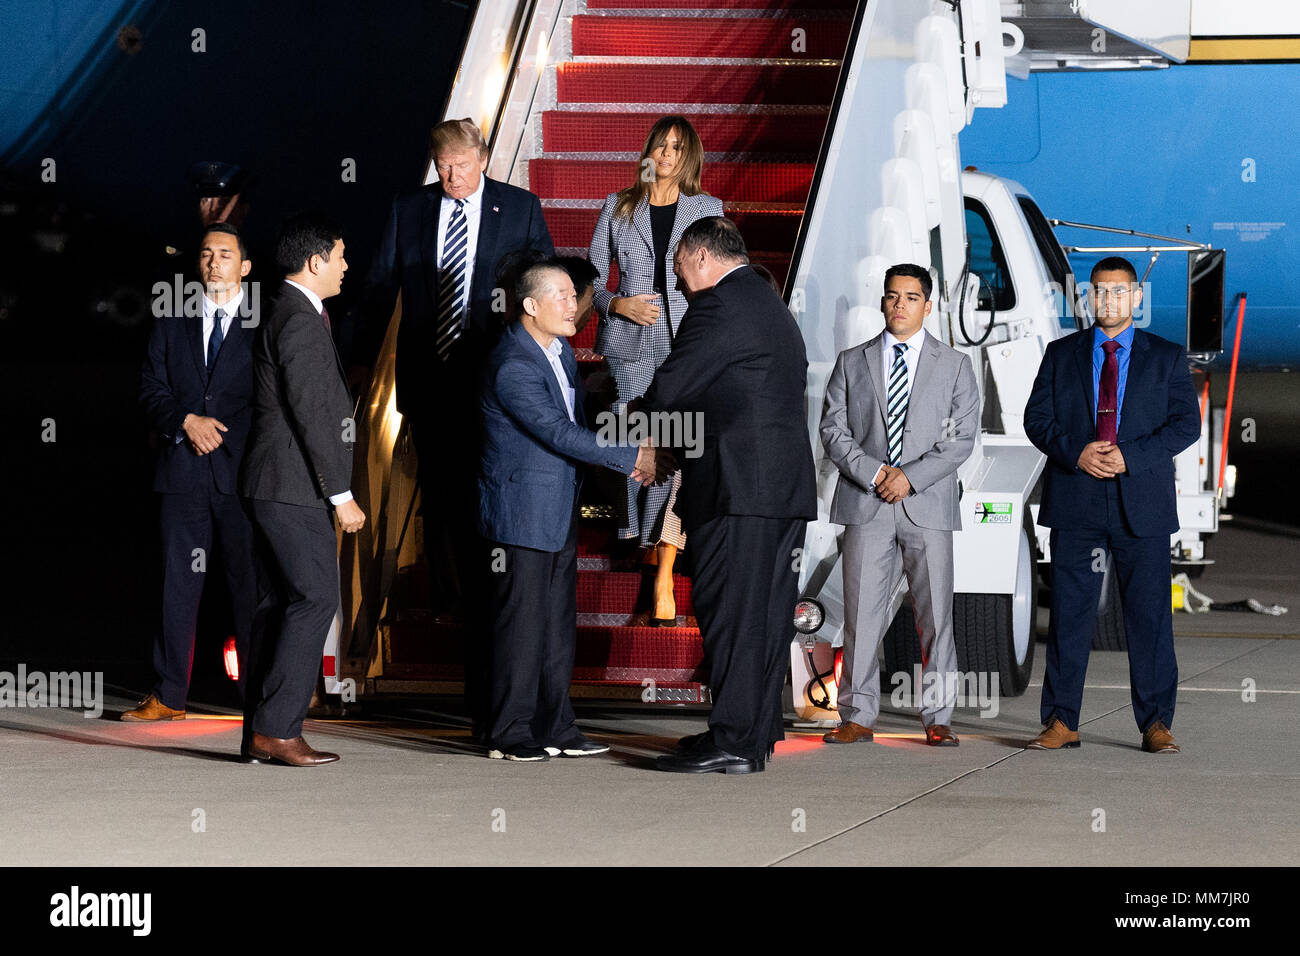 President Donald Trump and his wife Melania exiting the plane with the three American detainees (Kim Dong-chul, Kim Hak-song, and Tony Kim) held in captivity in North Korea with Secretary of State Mike Pompeo at the base of the stairs, at Joint Base Andrews in Suitland. Stock Photo